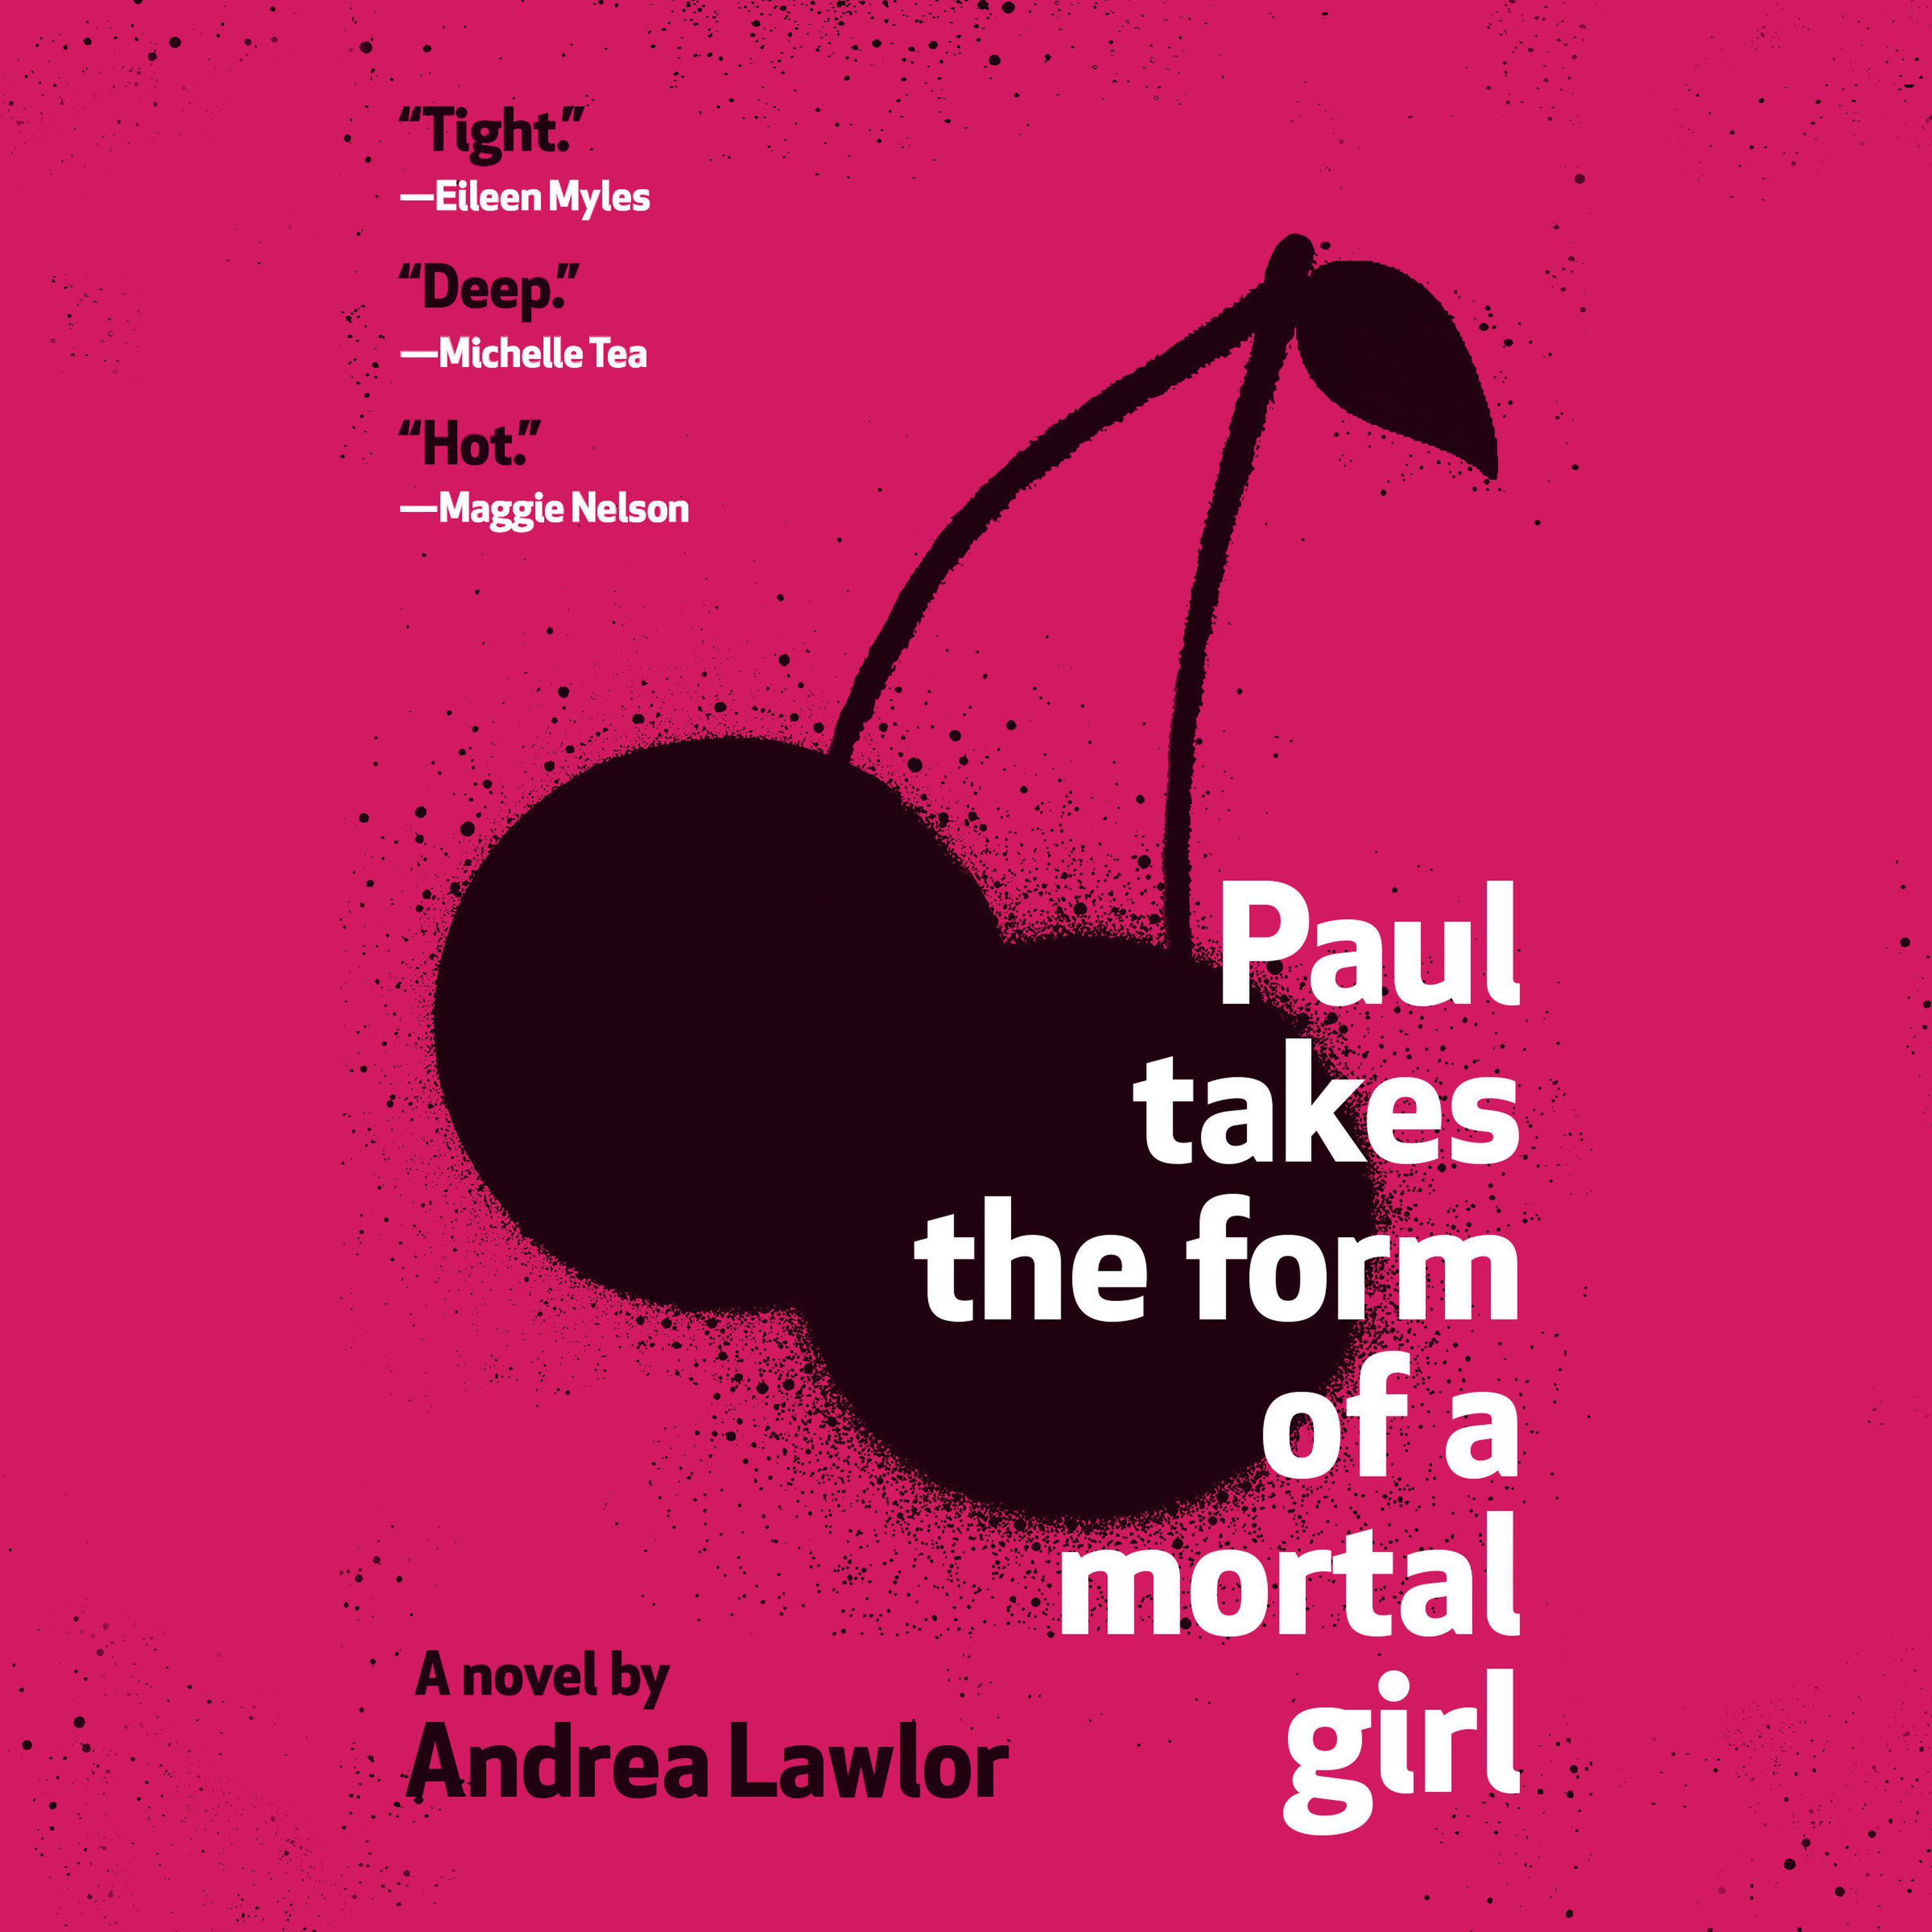 paul-takes-the-form-of-a-mortal-girl-audiobook-listen-instantly